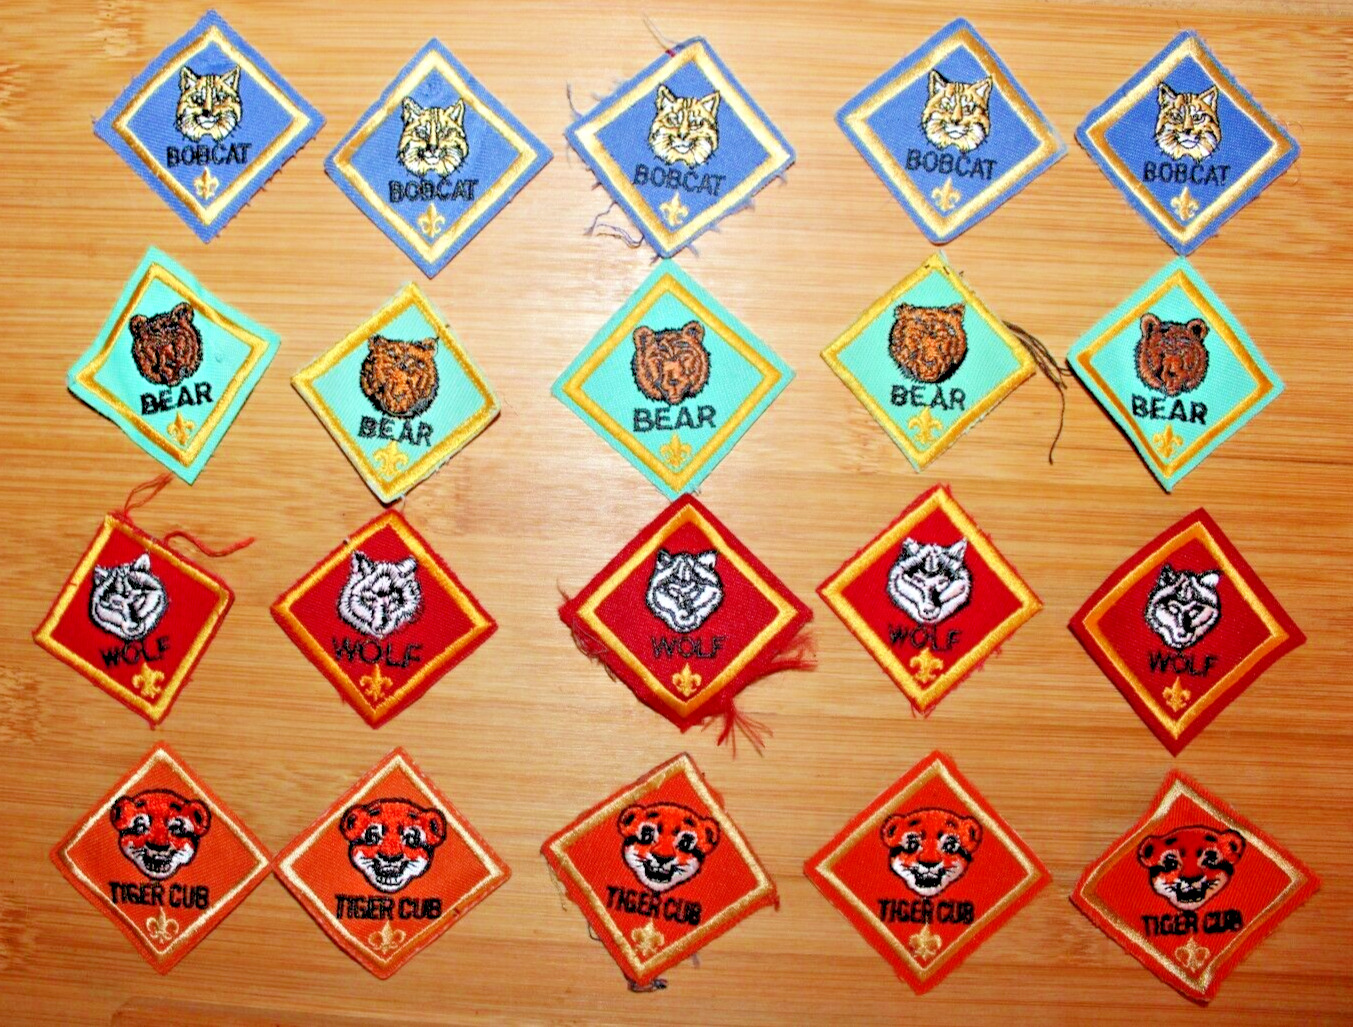 Boy Scouts of America BSA Patches lot of 20 Bear Bobcat wolf Tiger Cub